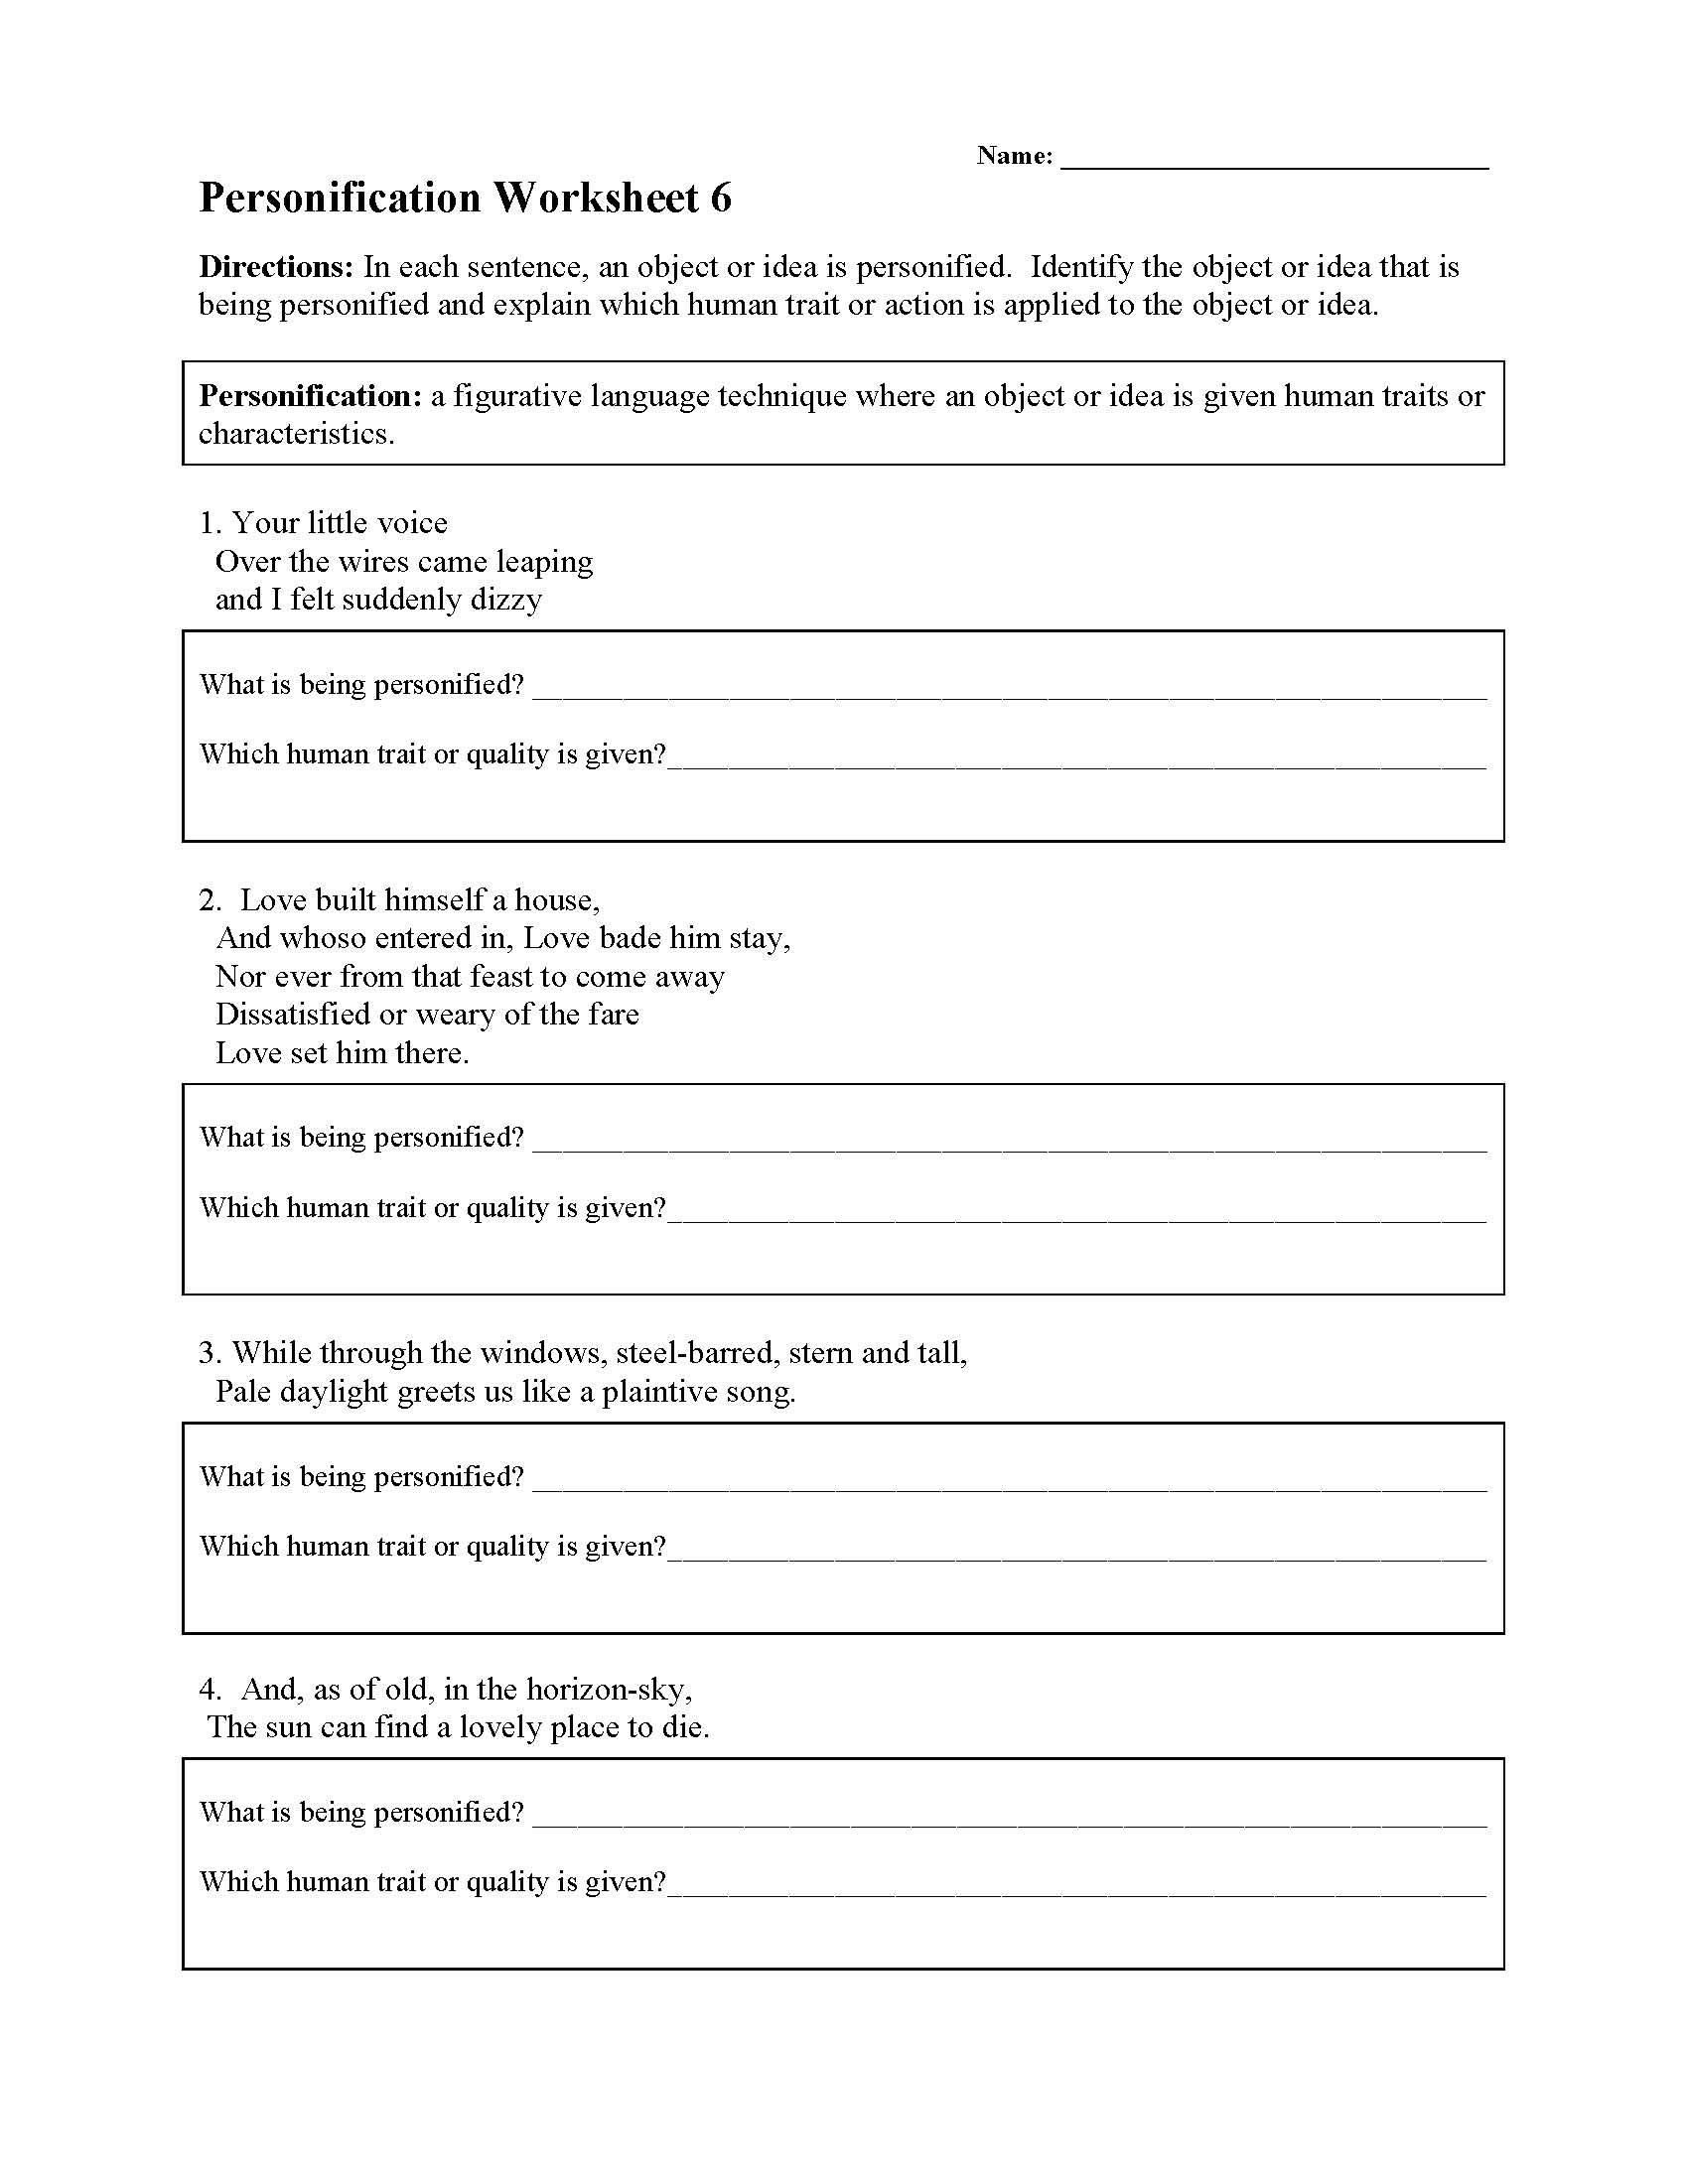 This is a preview image of Personification Worksheet 6. Click on it to enlarge it or view the source file.